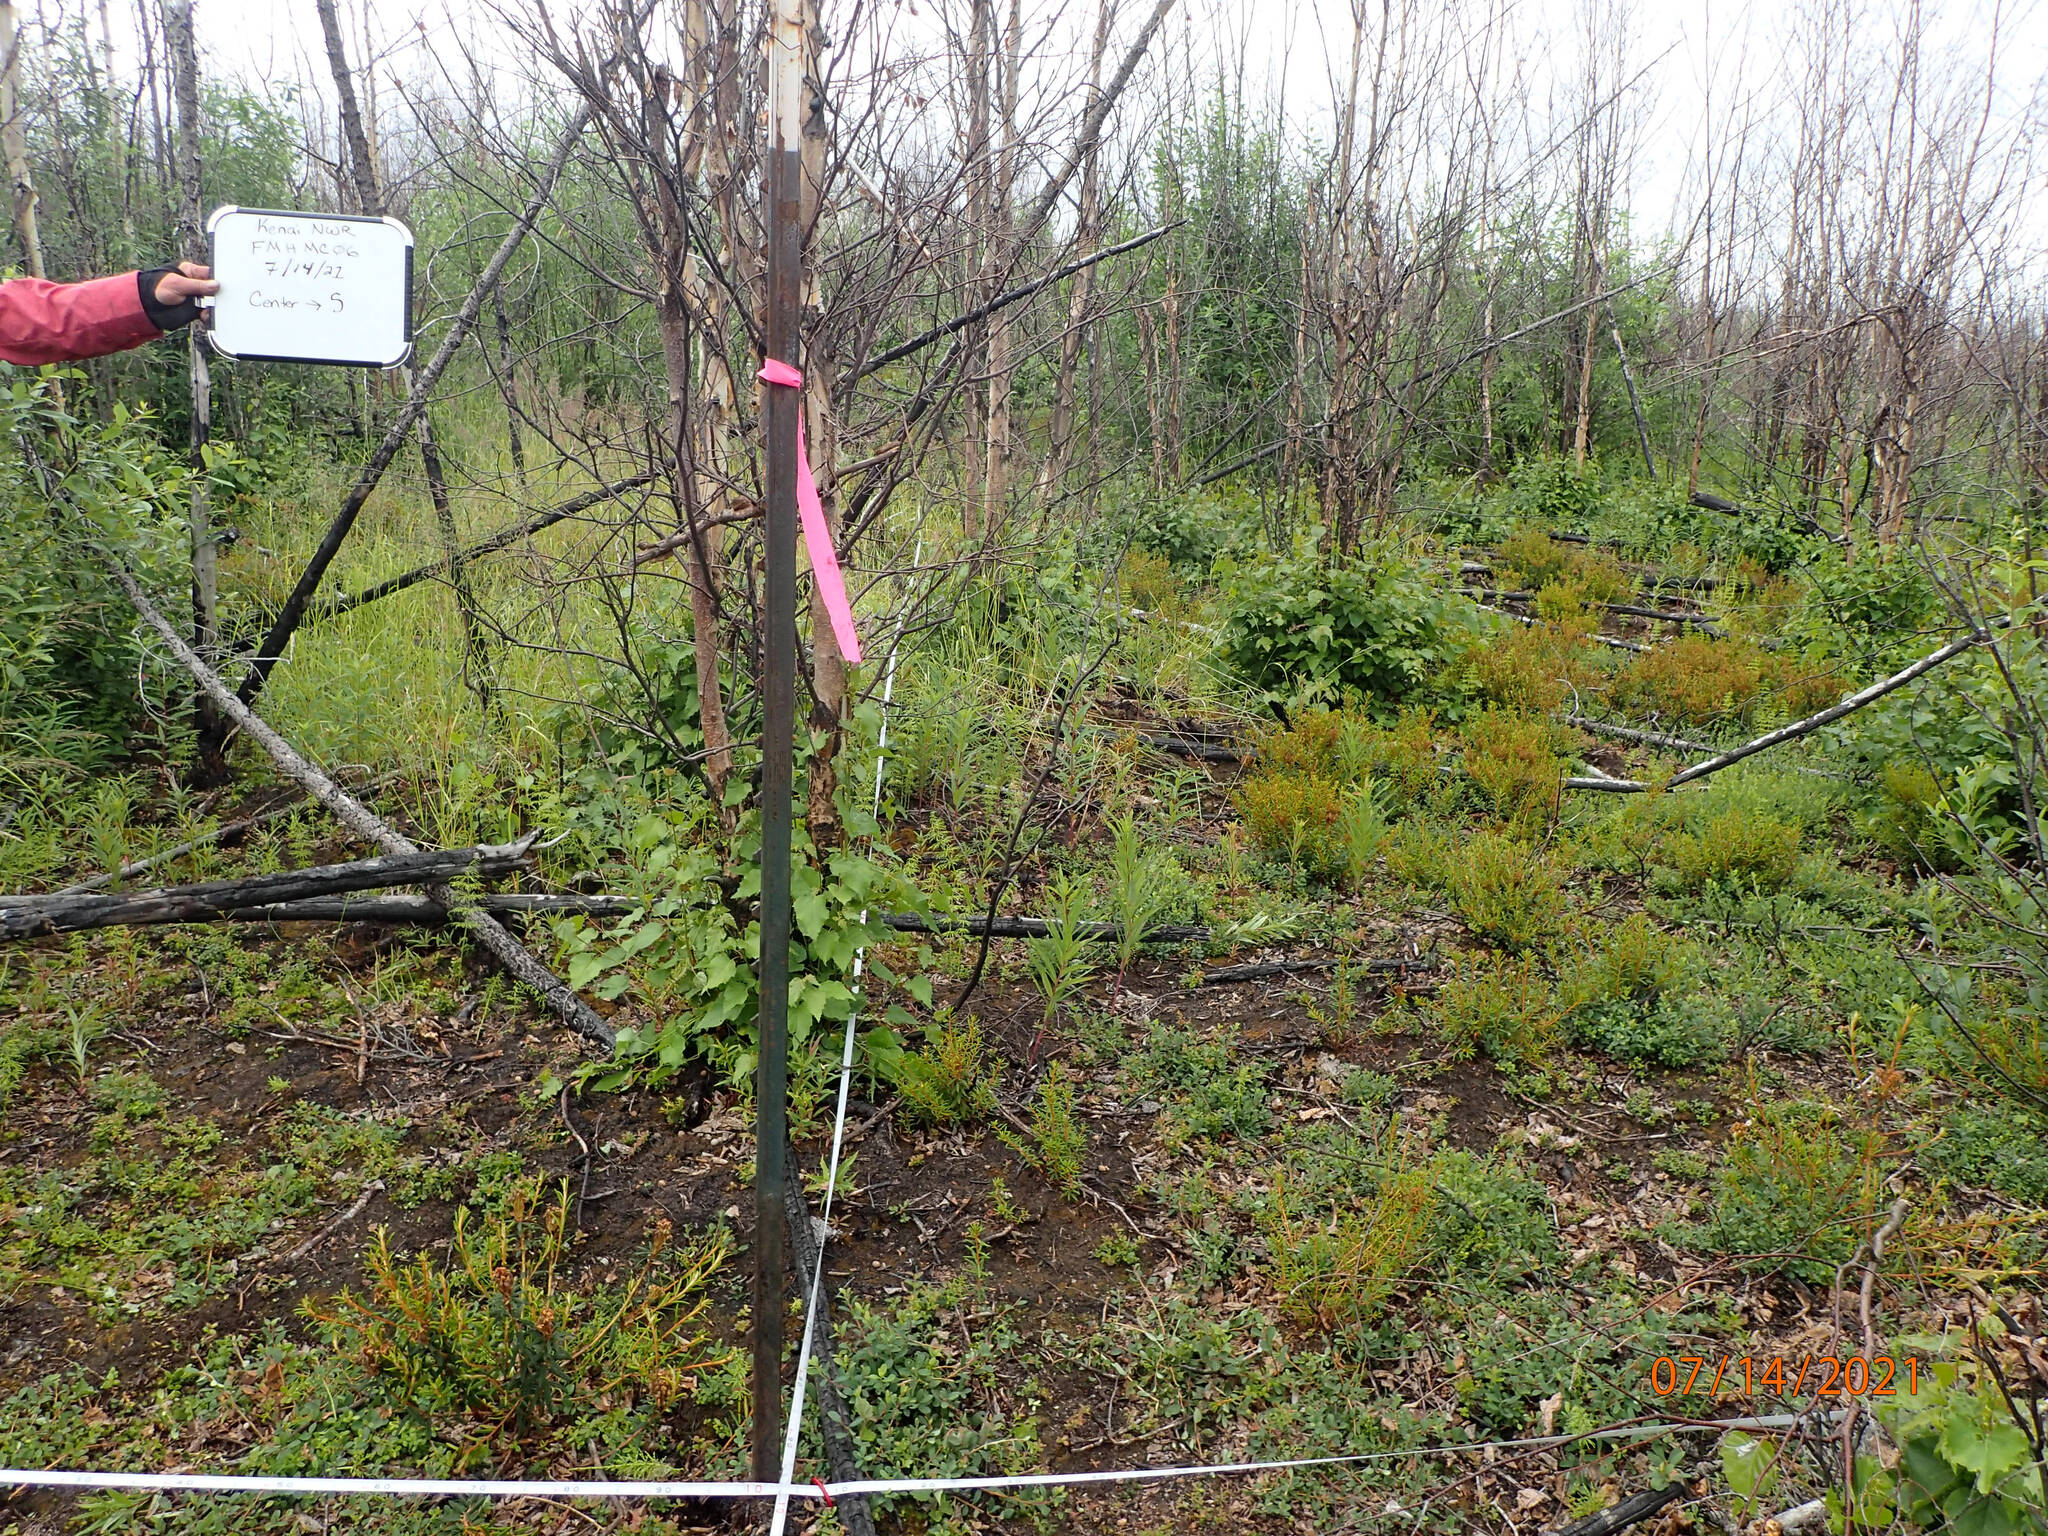 This is the second photo of a Mystery Creek plot. This plot was burned by a prescribed fire plus Swan Lake Fire. This plot shows spruce killed by the prescribed fire (leaning and on the ground), birch and tall willows top-killed by Swan Lake and resprouting from the base, and resprouting low shrubs. Photo taken in 2021. (Photo provided)